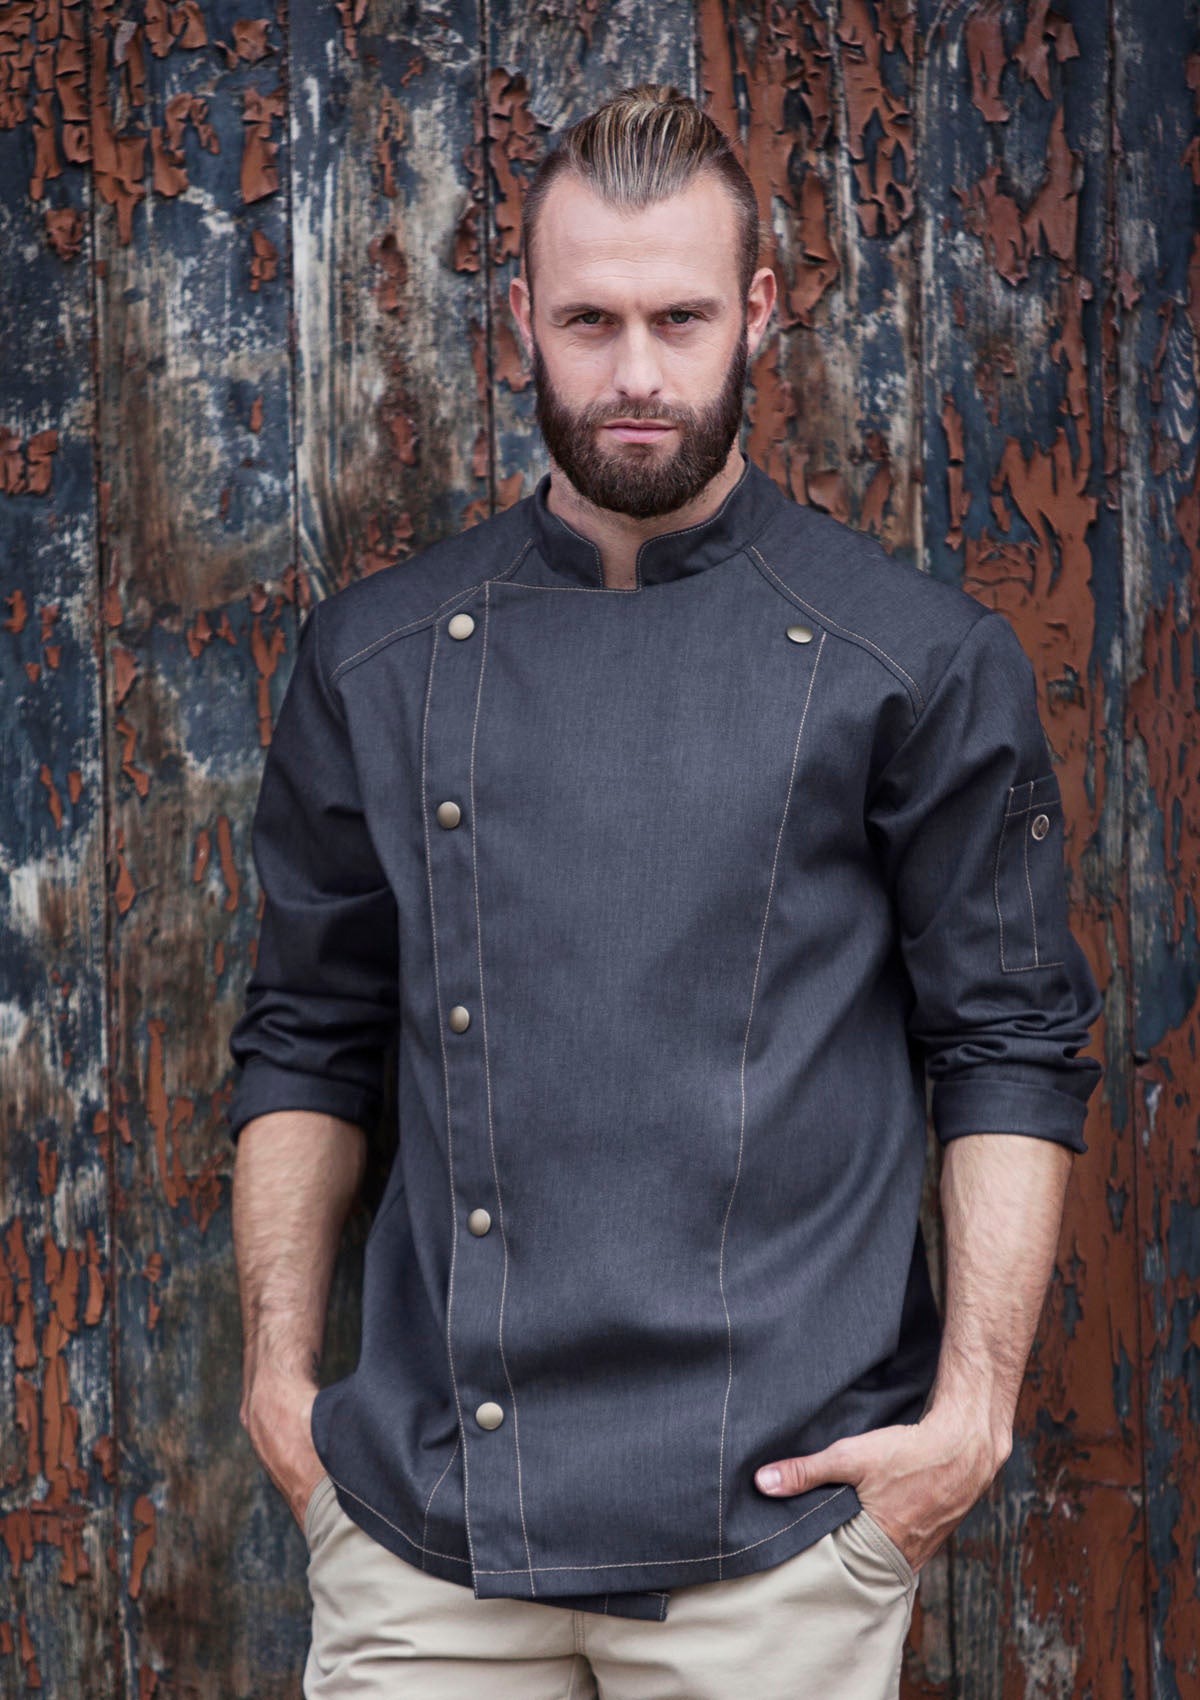 Men's Chef Jacket Jeans-Look Long Sleeves In Vintage Colours